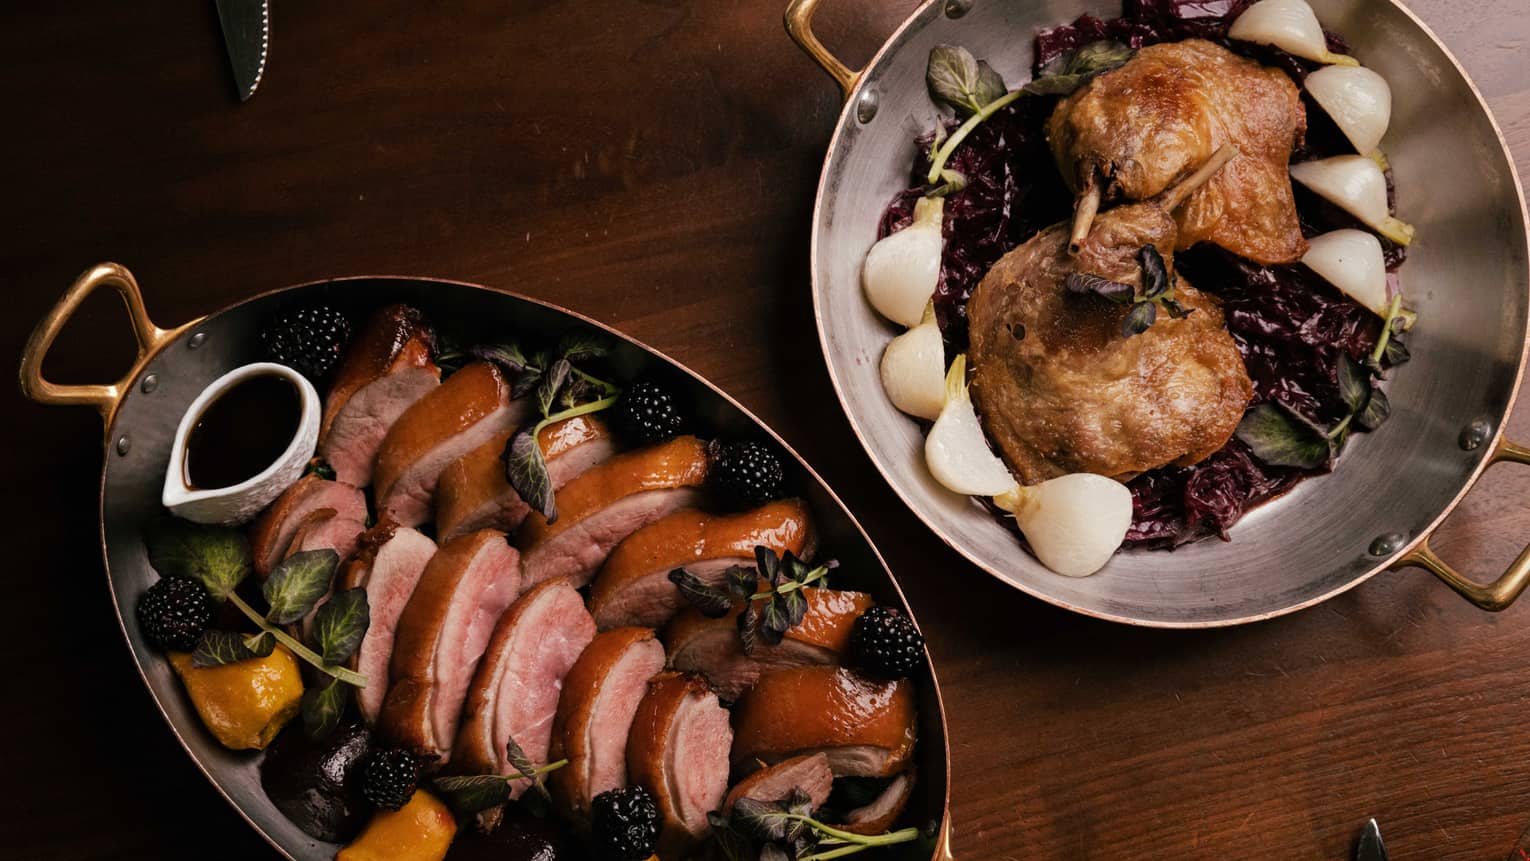 Metal pans of roasted duck and game hens